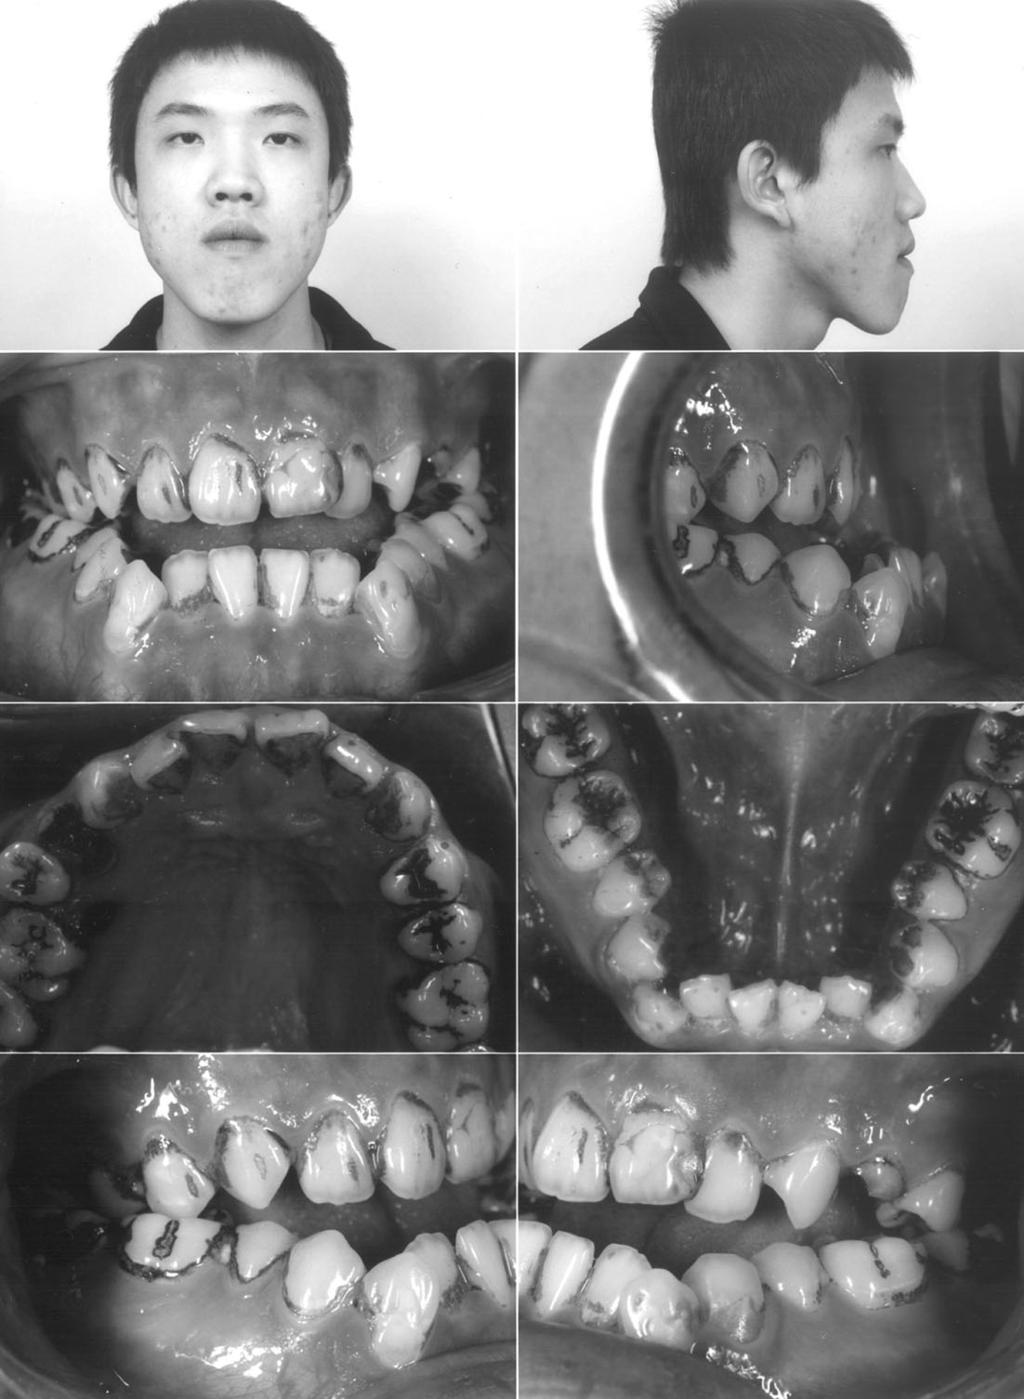 Chung-Chih Yu, et al 700 could be established easily without preoperative orthodontics. These patients were braced just before OGS, usually less than two weeks.